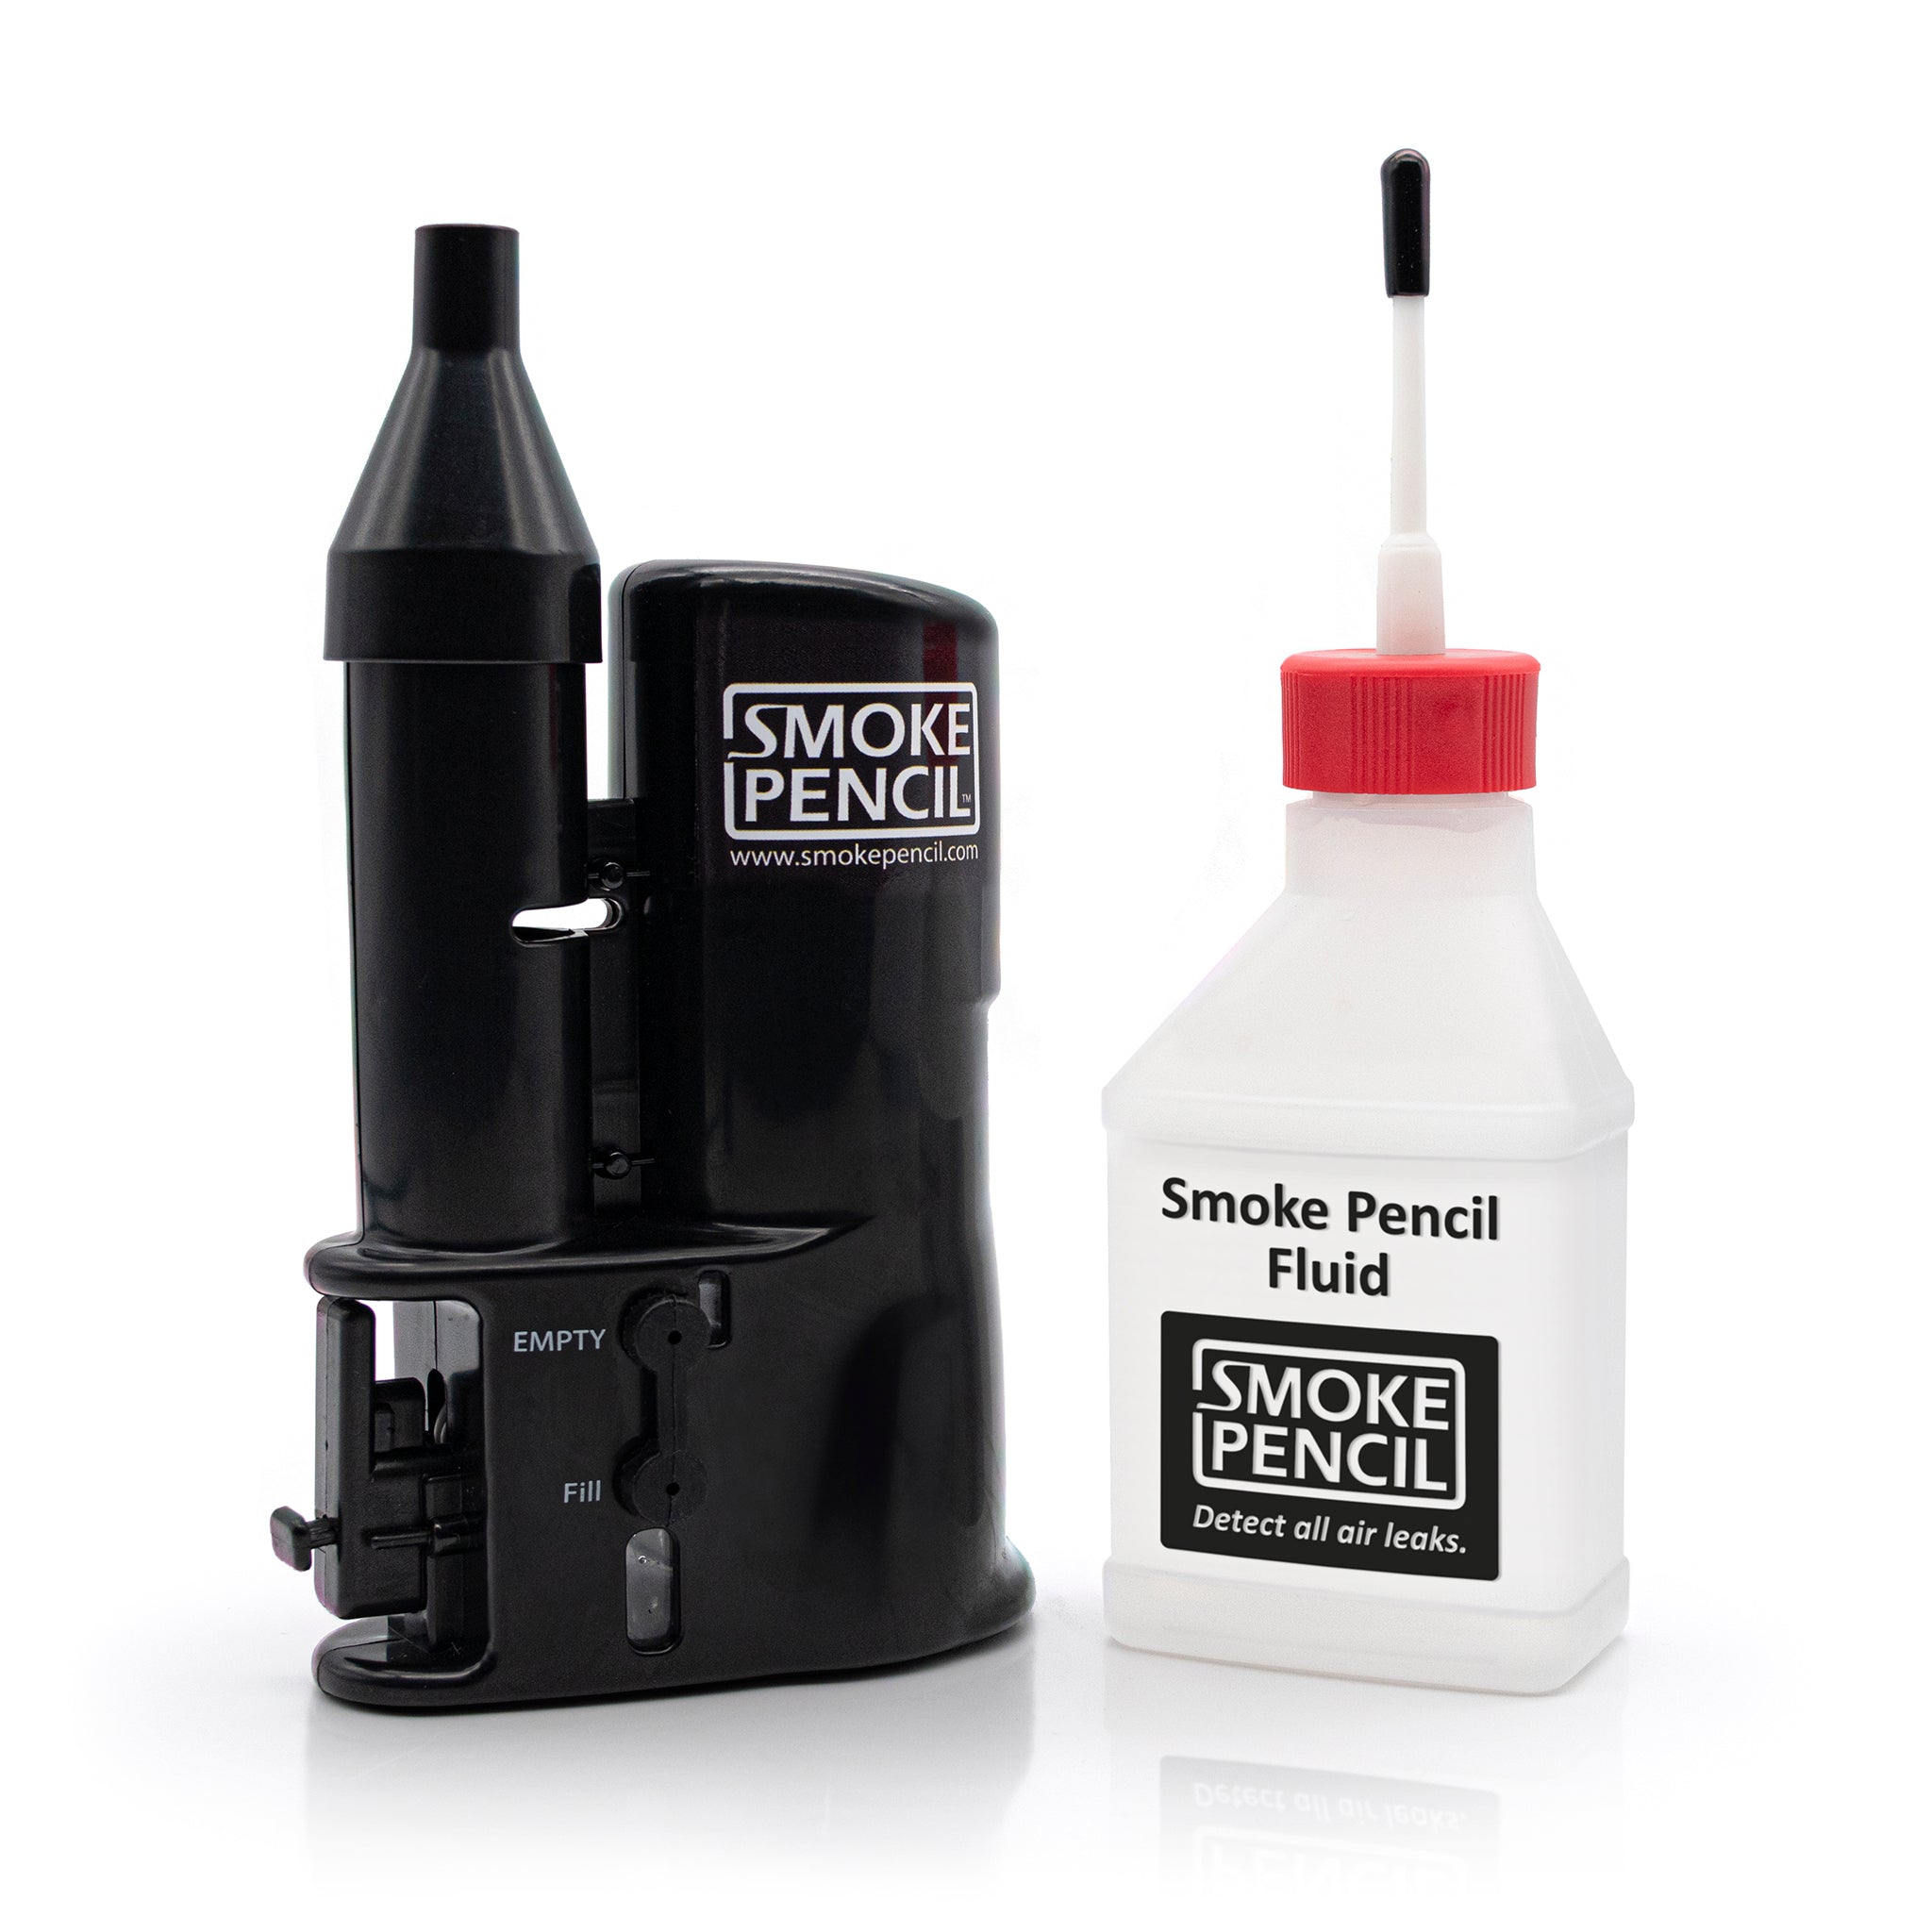 Smoke Pencil draught finder with smoke pencil fluid